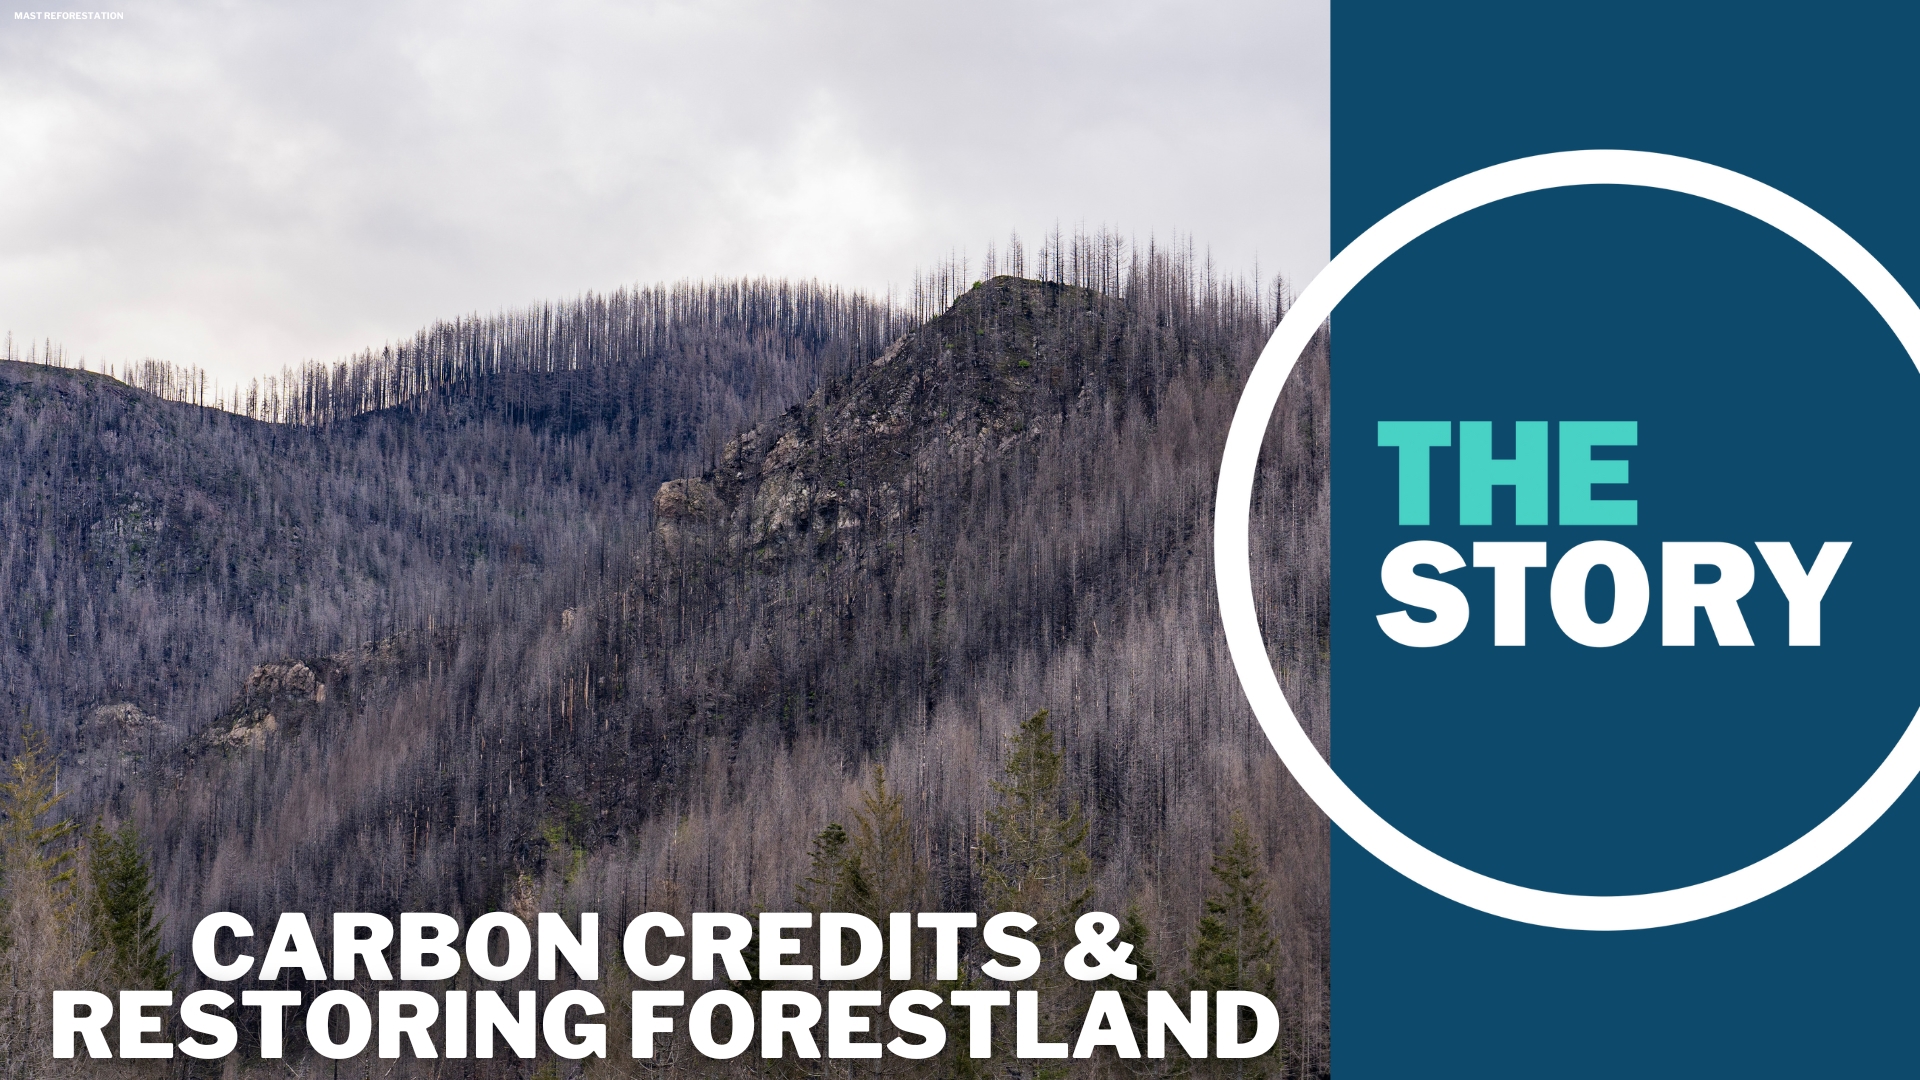 By offering carbon credits to landowners, Mast Reforestation gets the necessary funding to replant and restore forests scarred by severe wildfires.